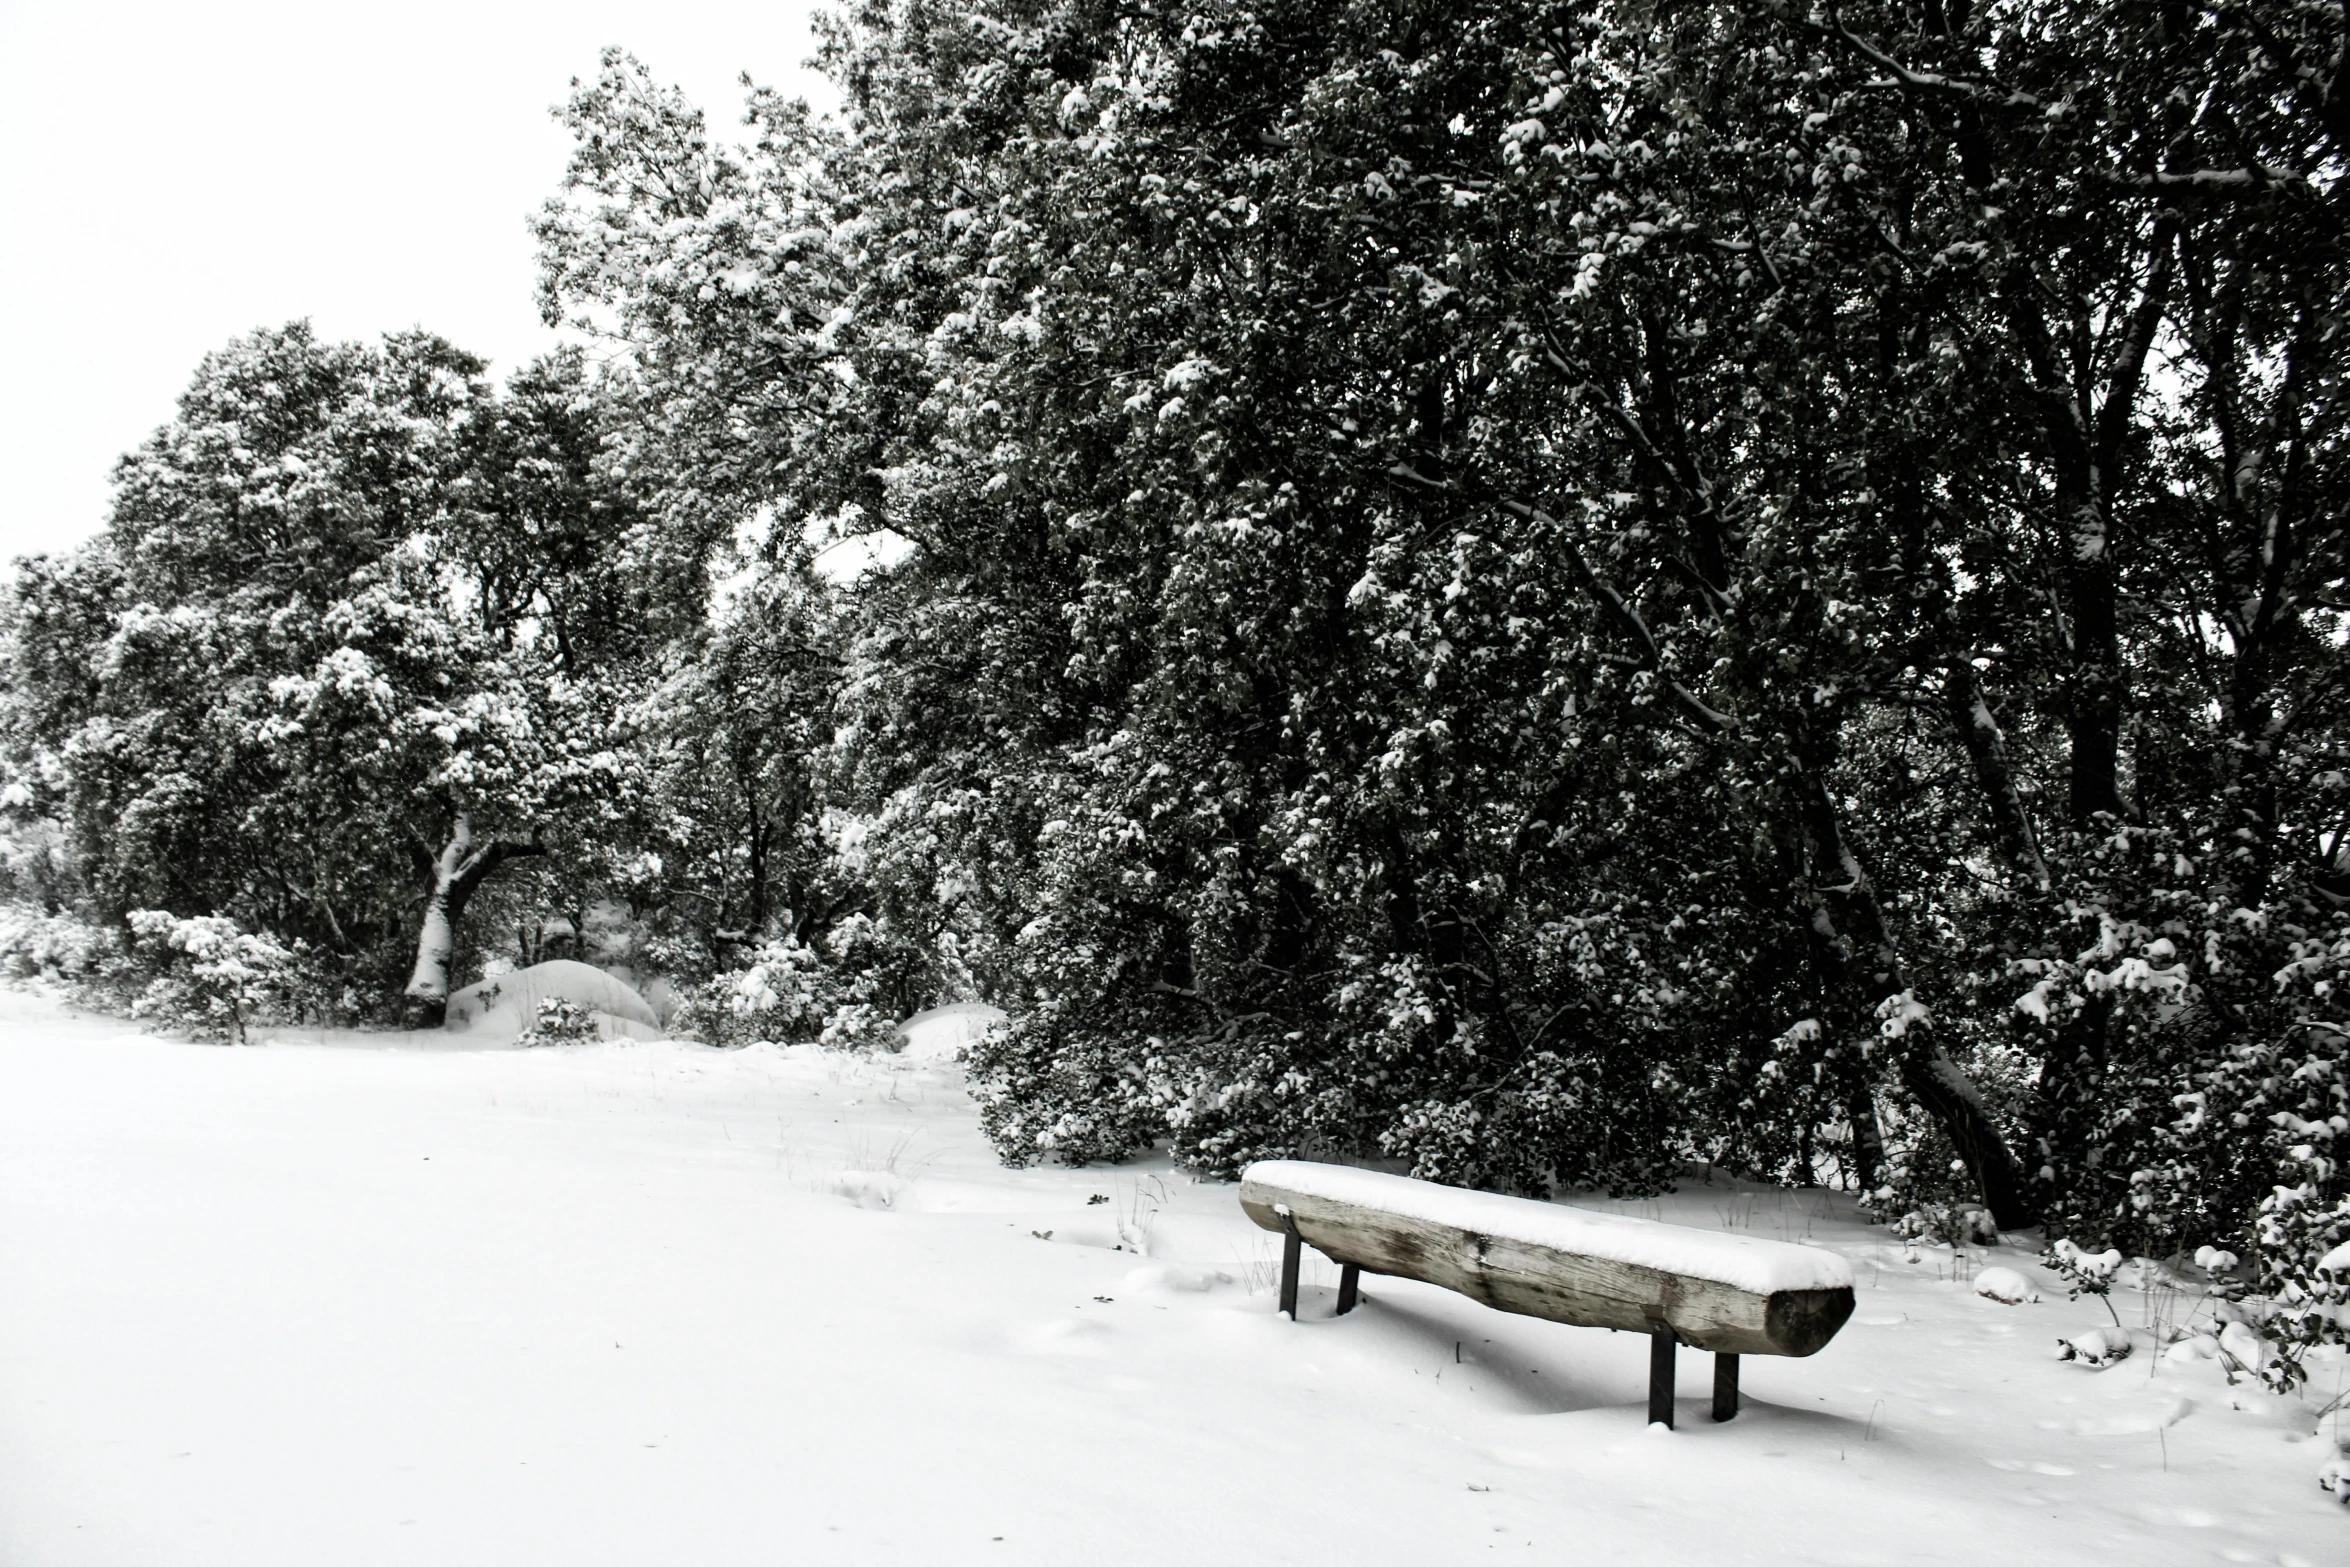 there is snow and a bench under some trees